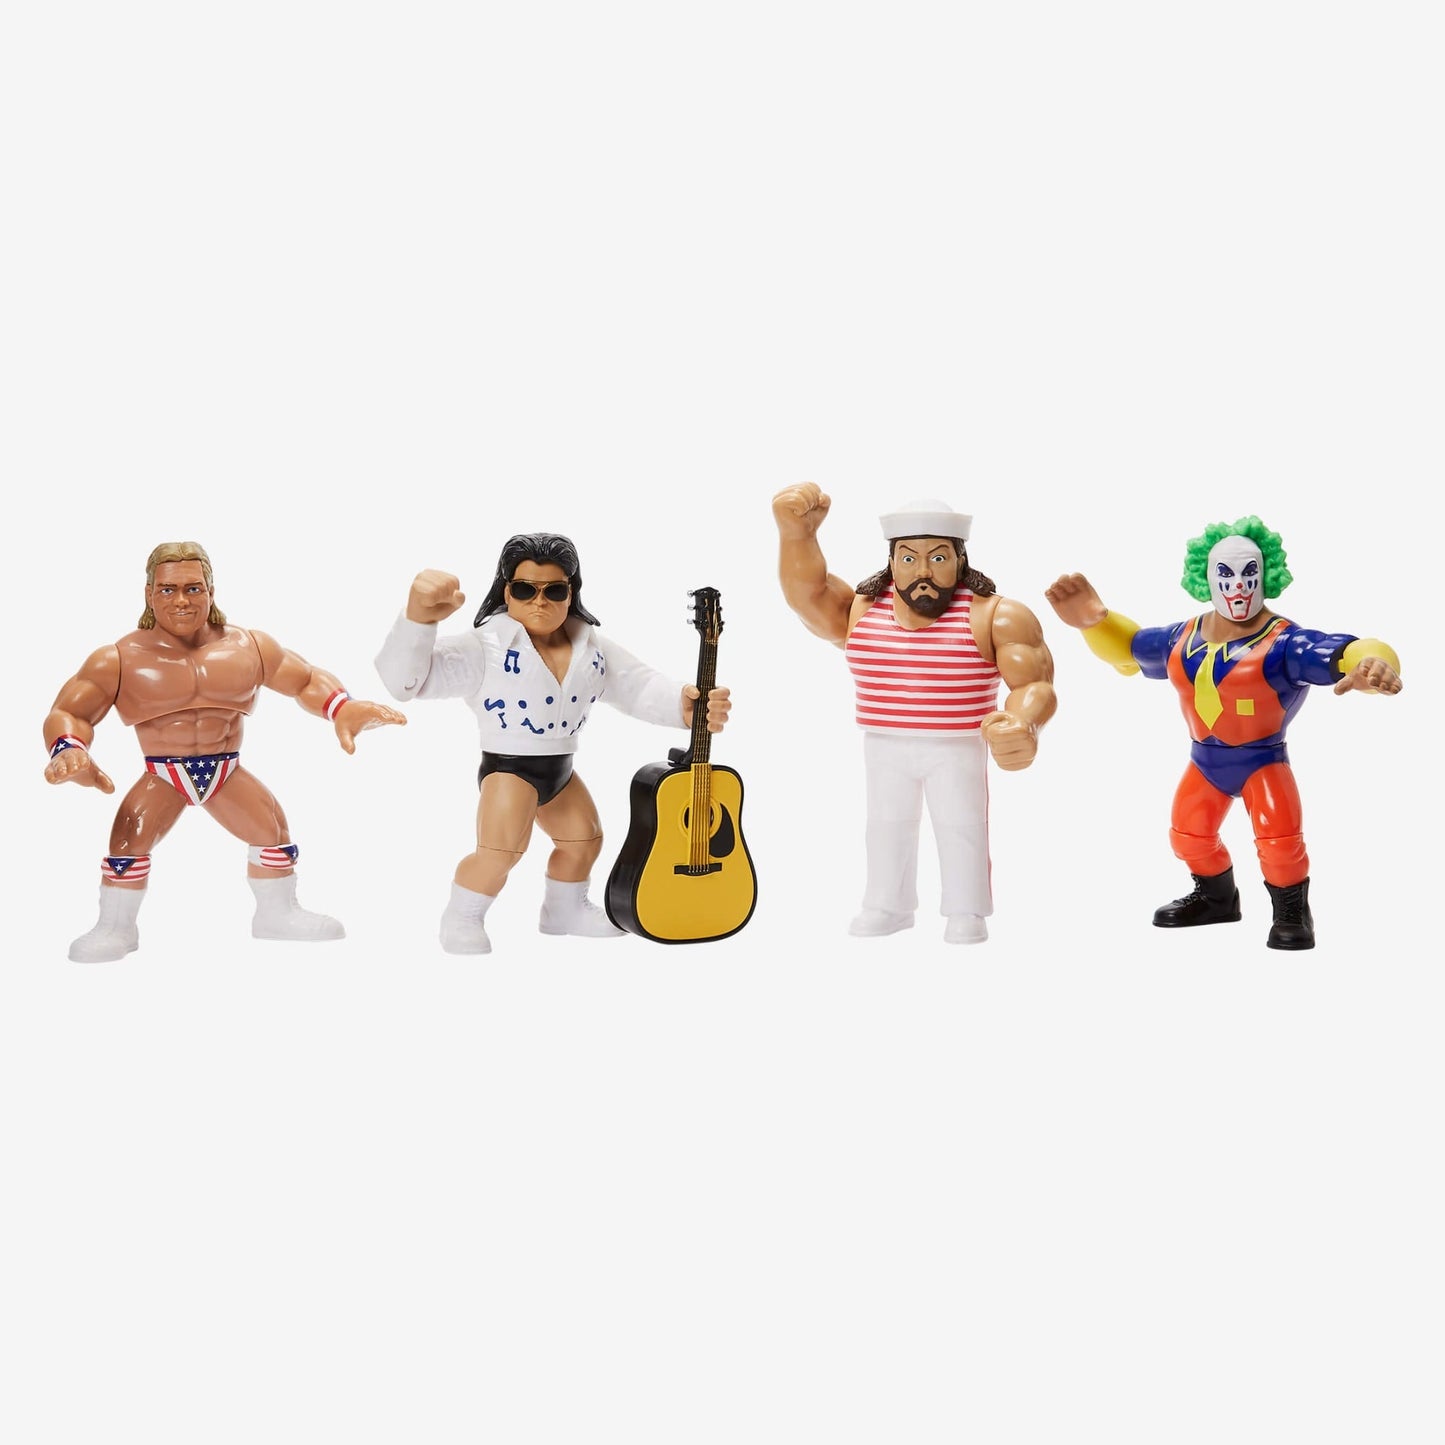 2023 WWE Mattel Creations Exclusive Retro Series 13 Official Retro 4-Pack